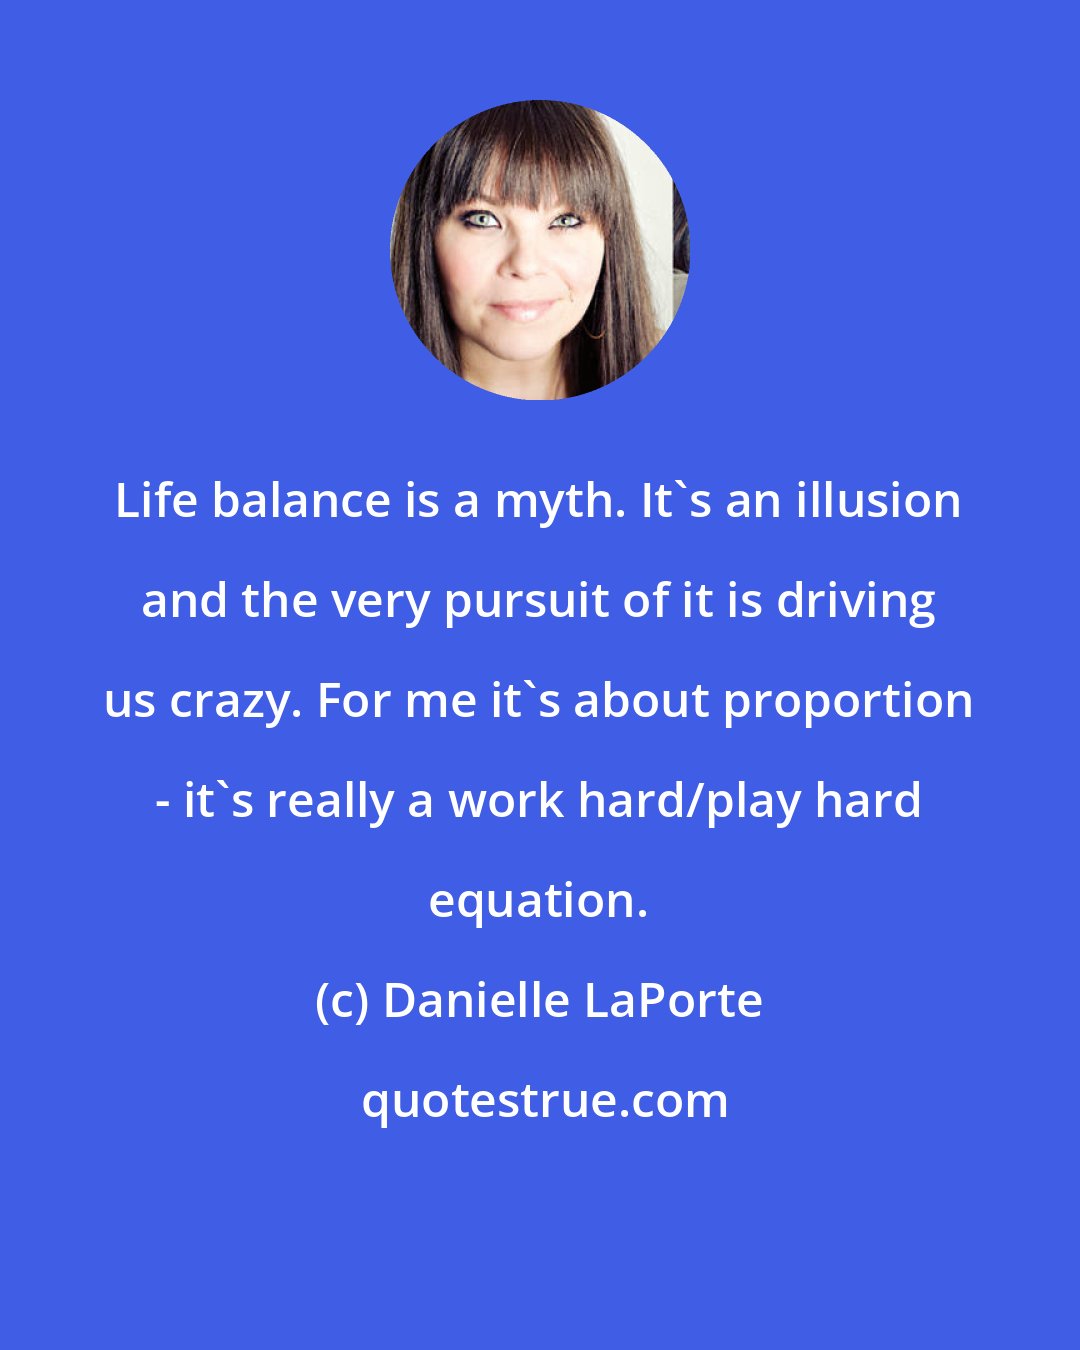 Danielle LaPorte: Life balance is a myth. It's an illusion and the very pursuit of it is driving us crazy. For me it's about proportion - it's really a work hard/play hard equation.